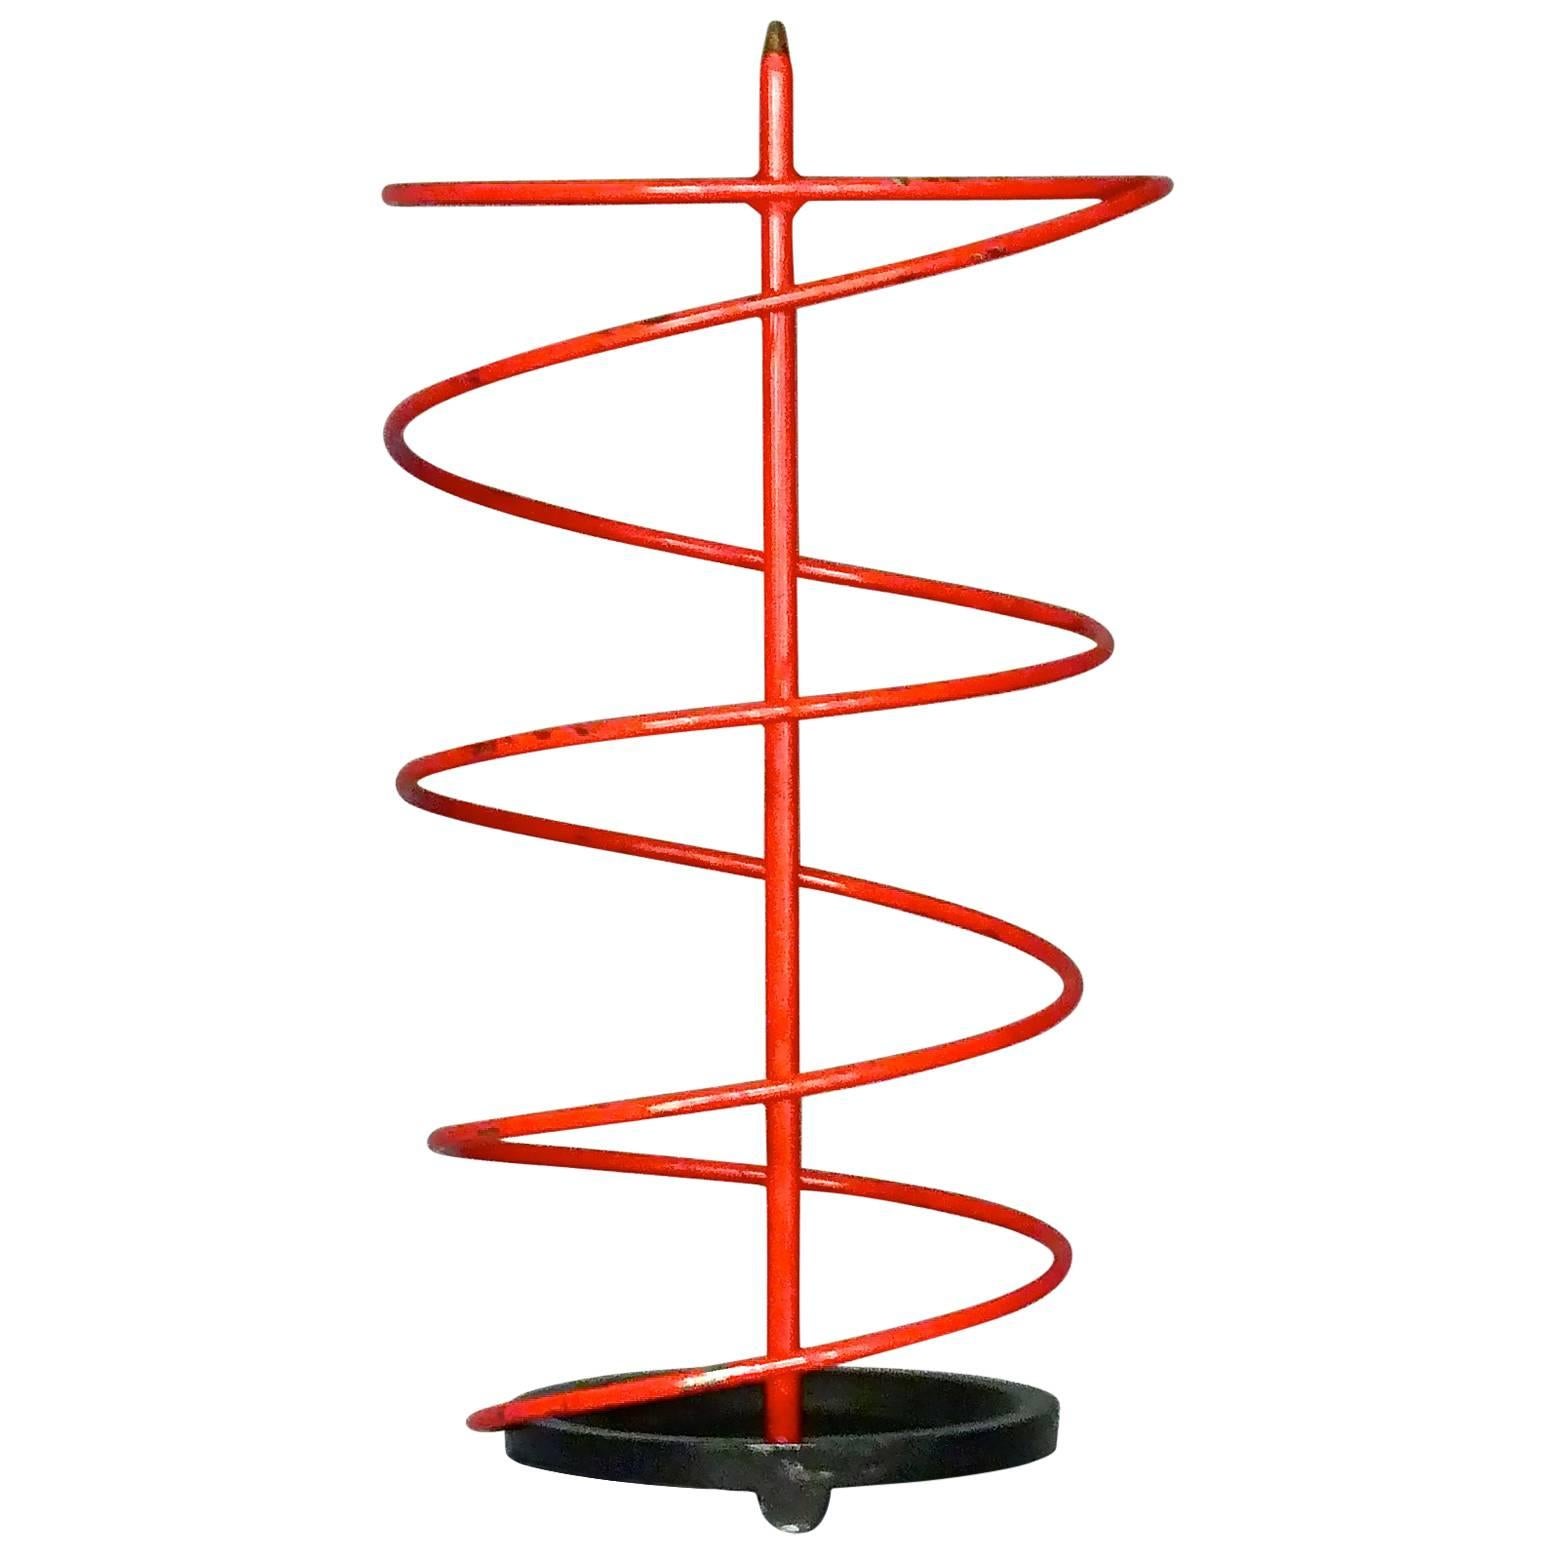 Rare French Modernist Umbrella Stand Red Black Iron Spiral Royere Style 1930s For Sale